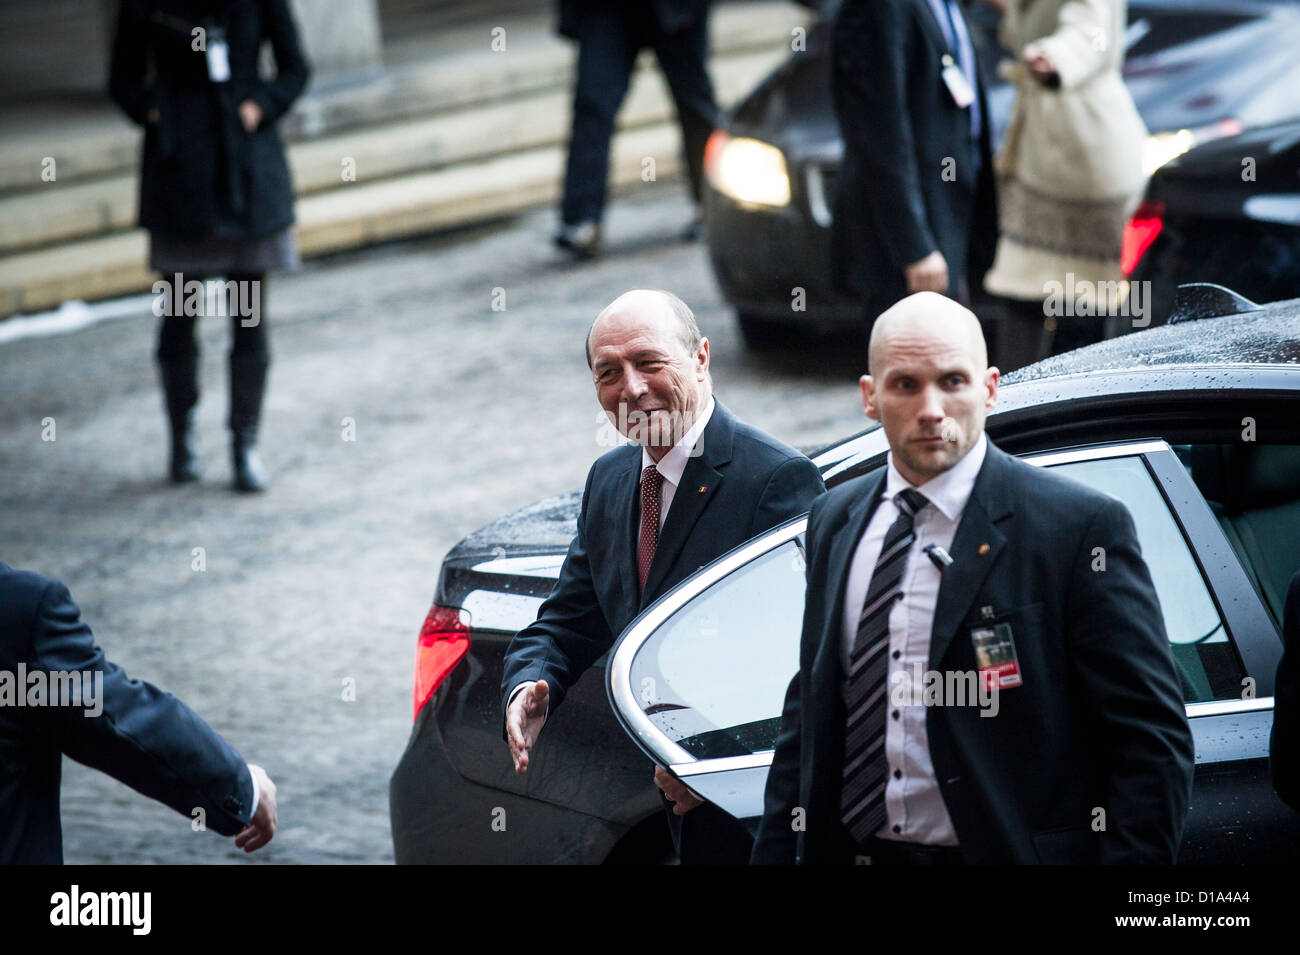 Oslo, Norway. 10/12/2012. Romanian President Traian Basescu arrives at The Nobel Peace Prize ceremony in Oslo. Stock Photo